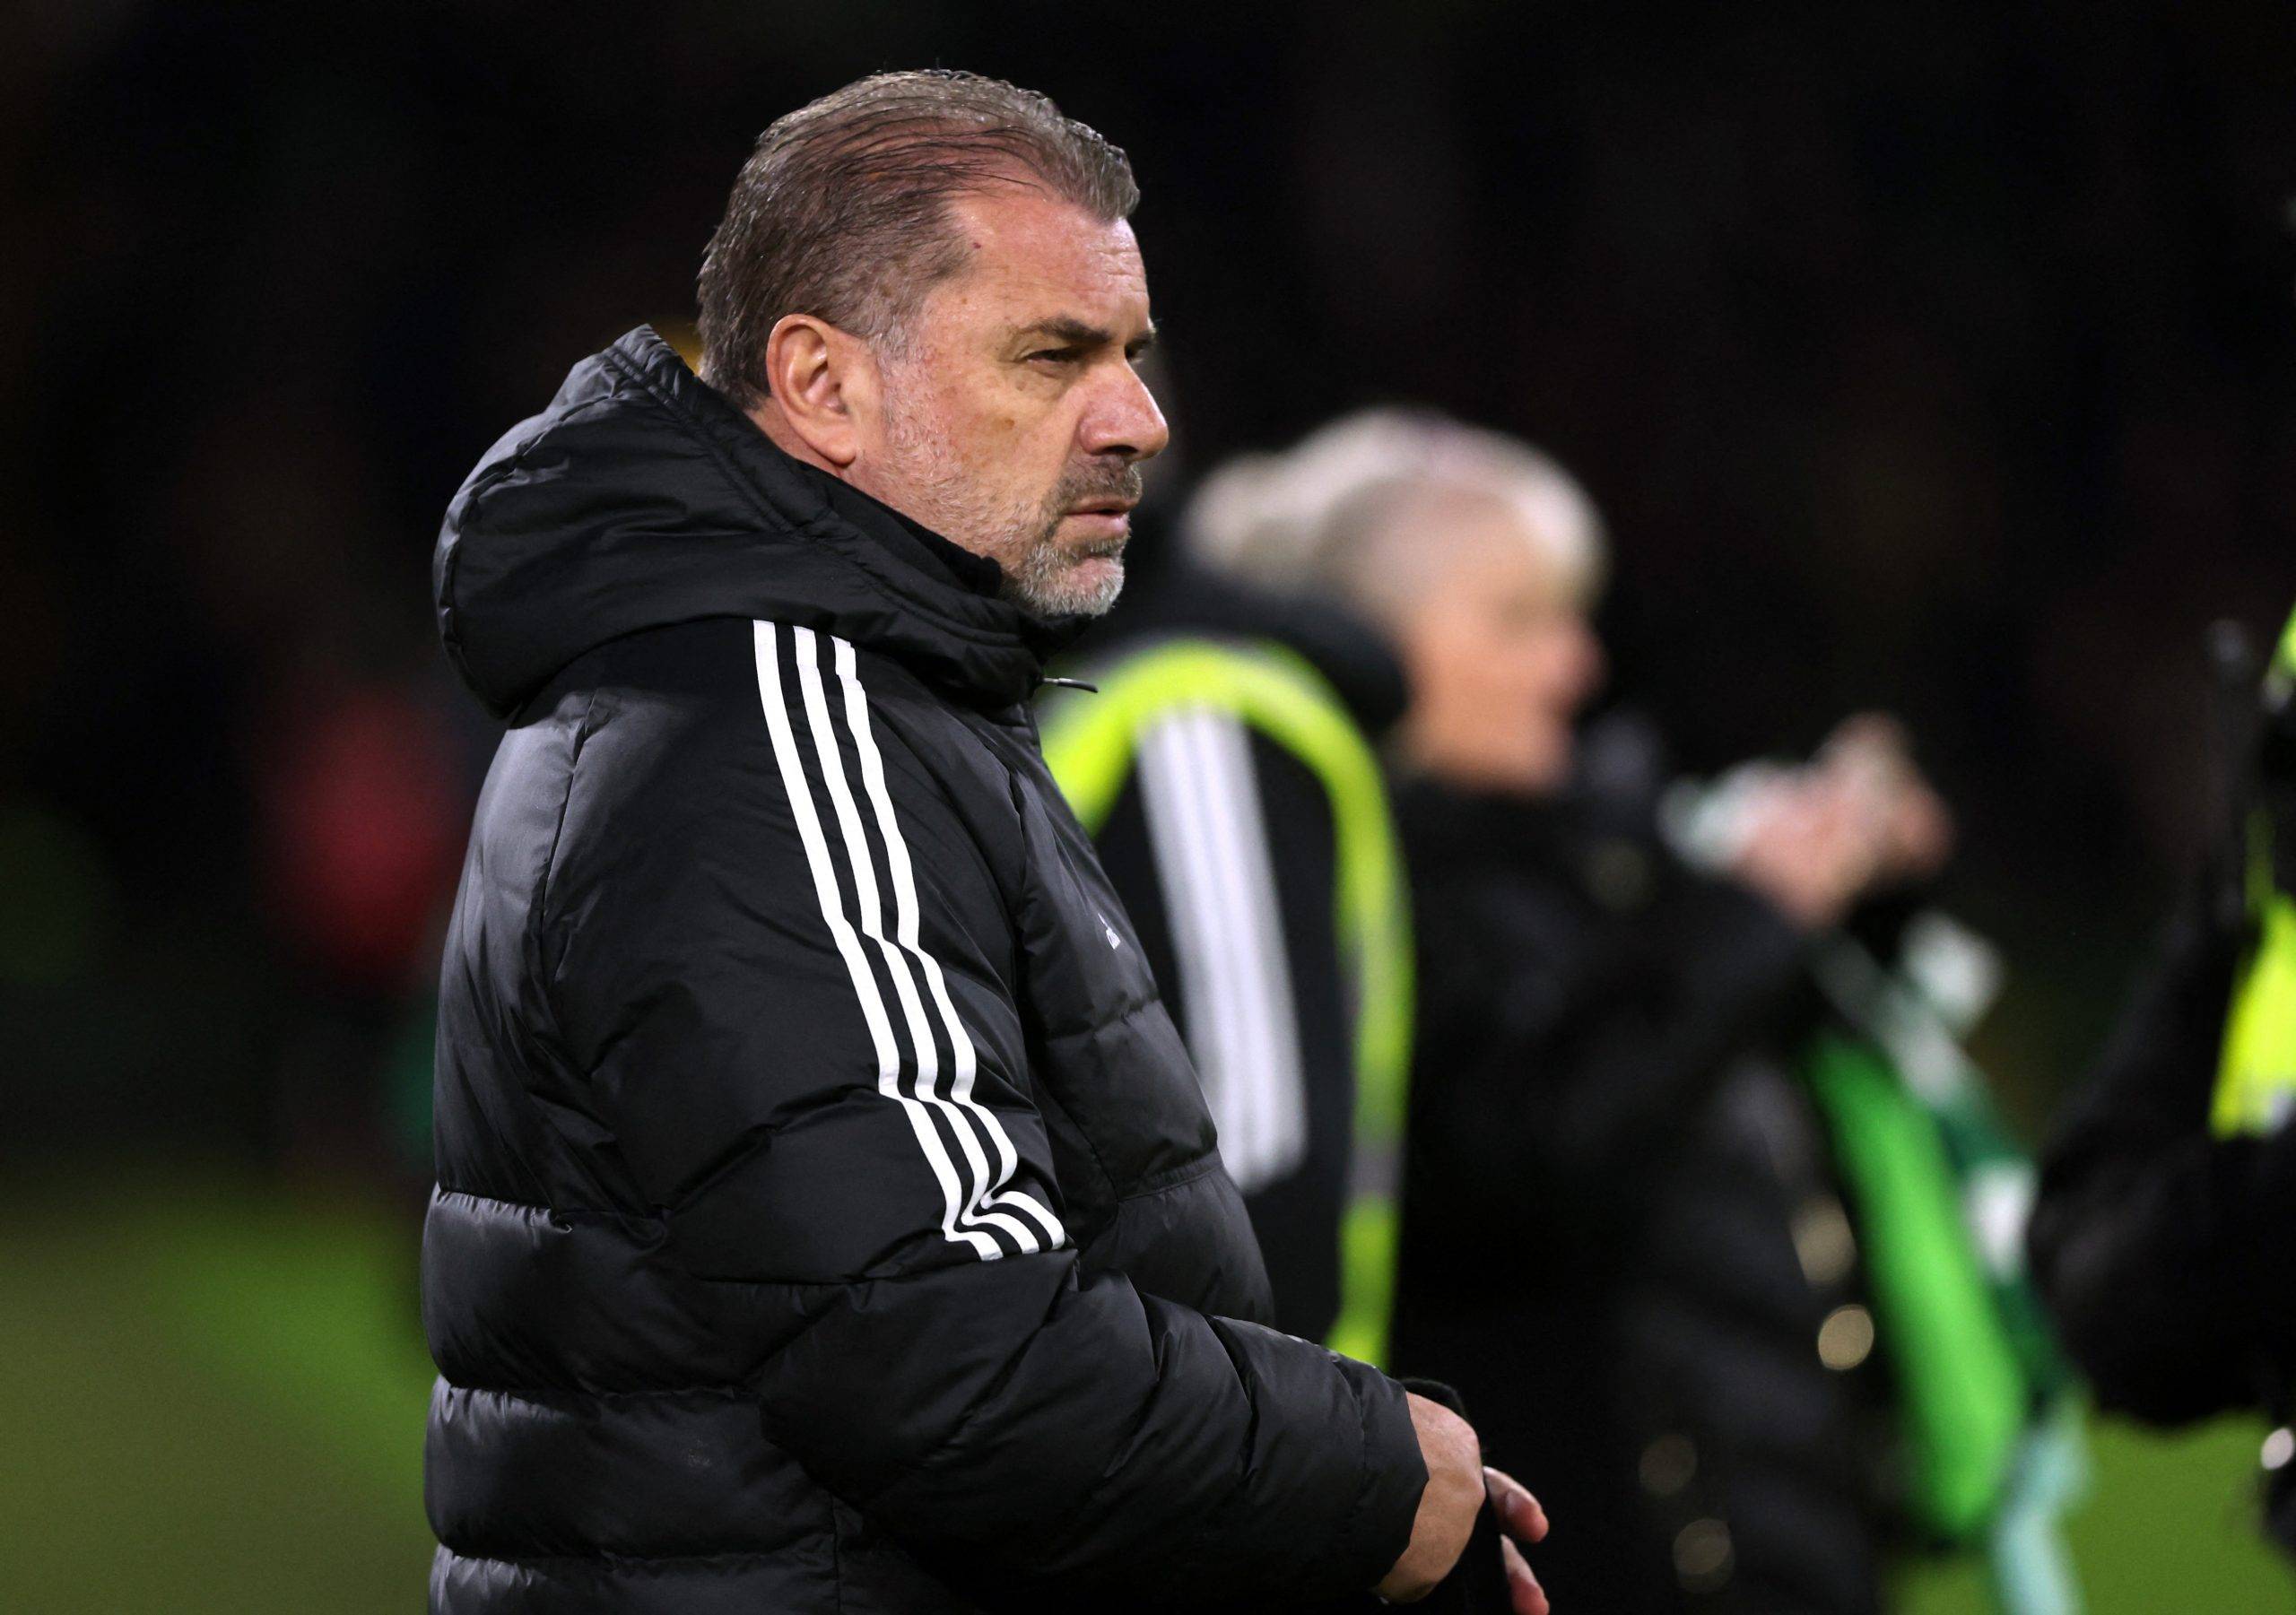 Celtic: Sky Sports man believes Ange Postecoglou wants to stay and win trophies - Celtic News